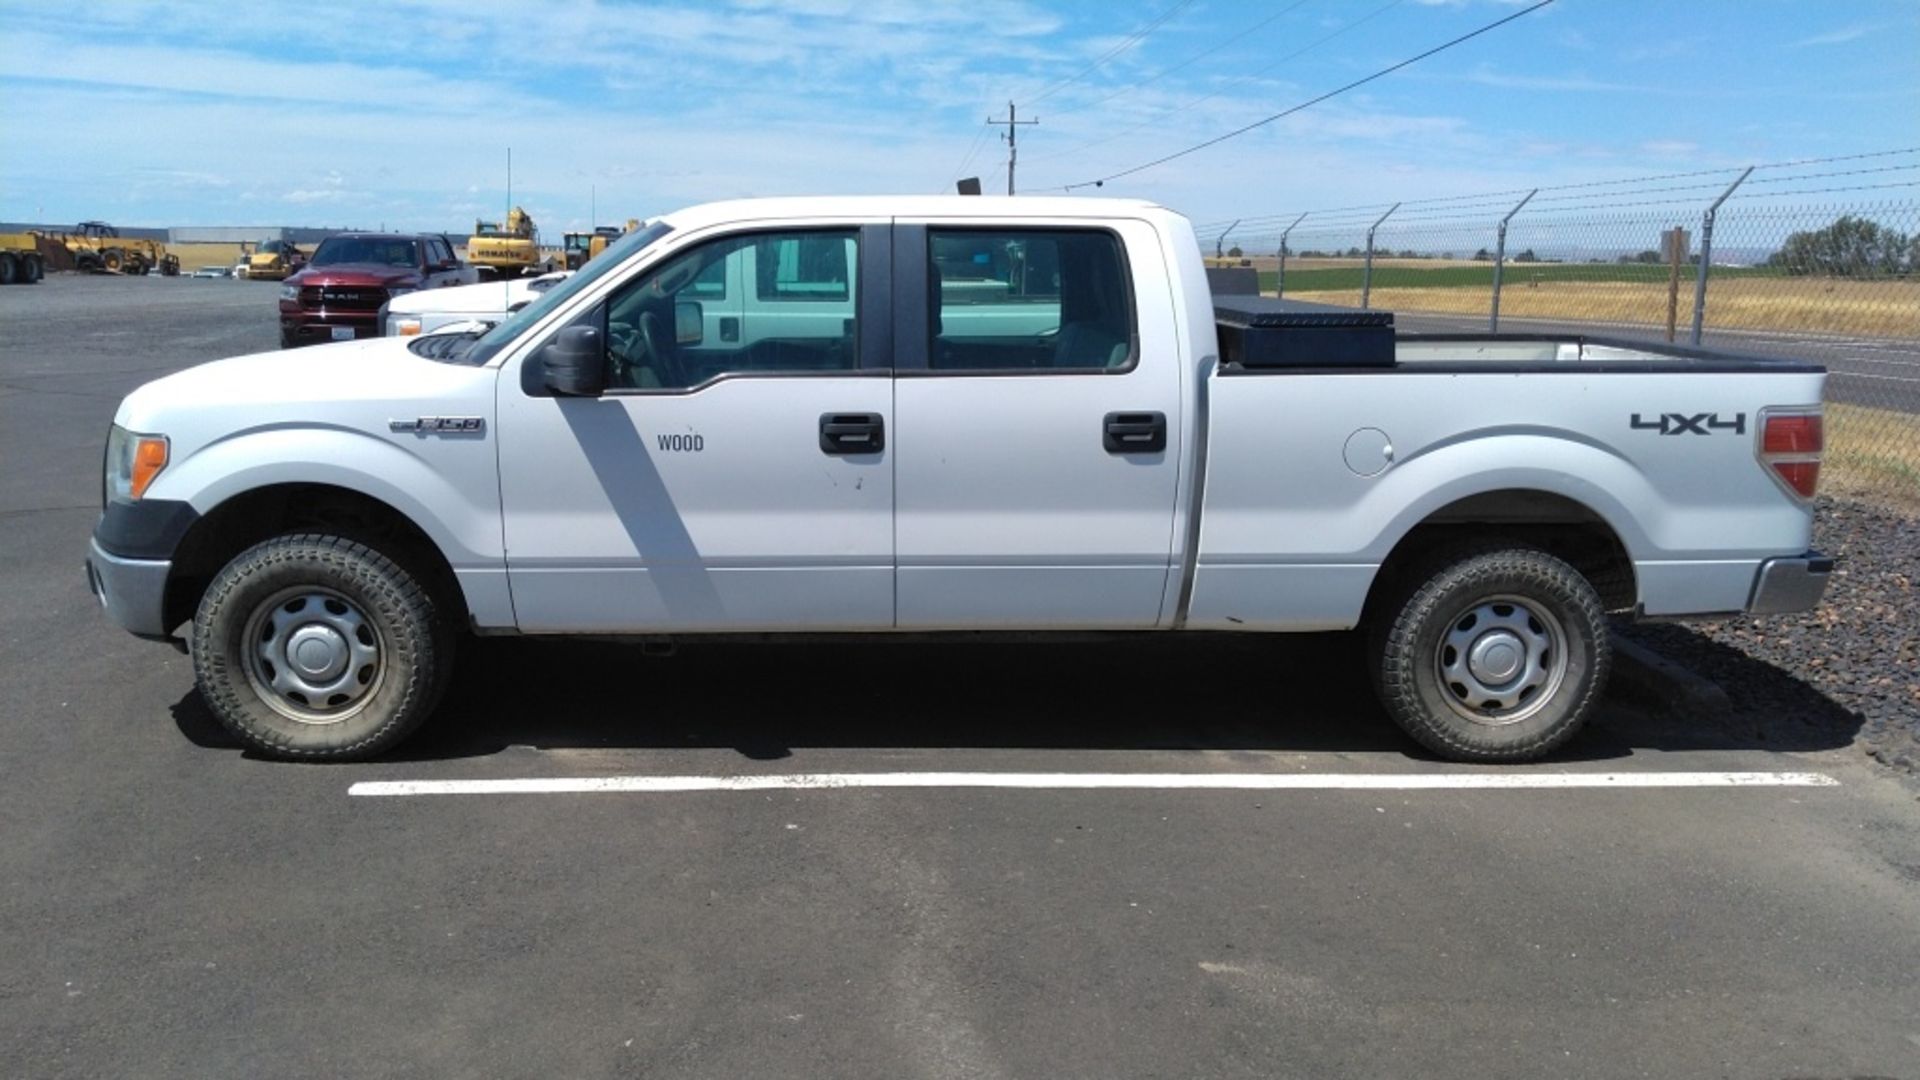 2011 Ford F150 XL 4x4 Crew Cab Pickup - Image 2 of 22